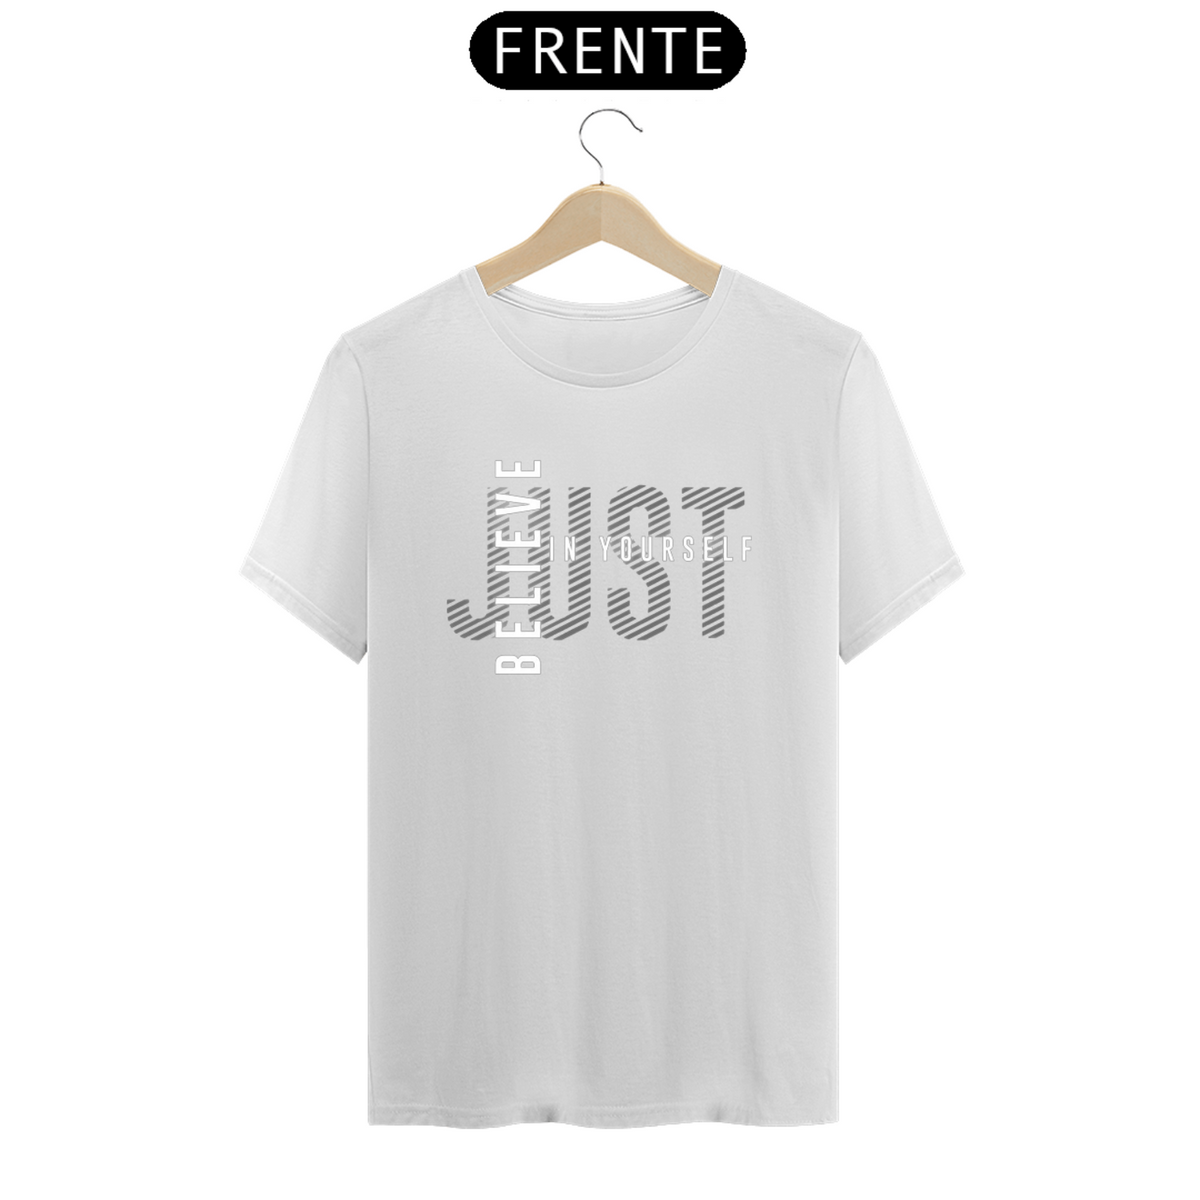 Nome do produto: T-SHIRT CLASSIC  JUNST IN YOURSELF